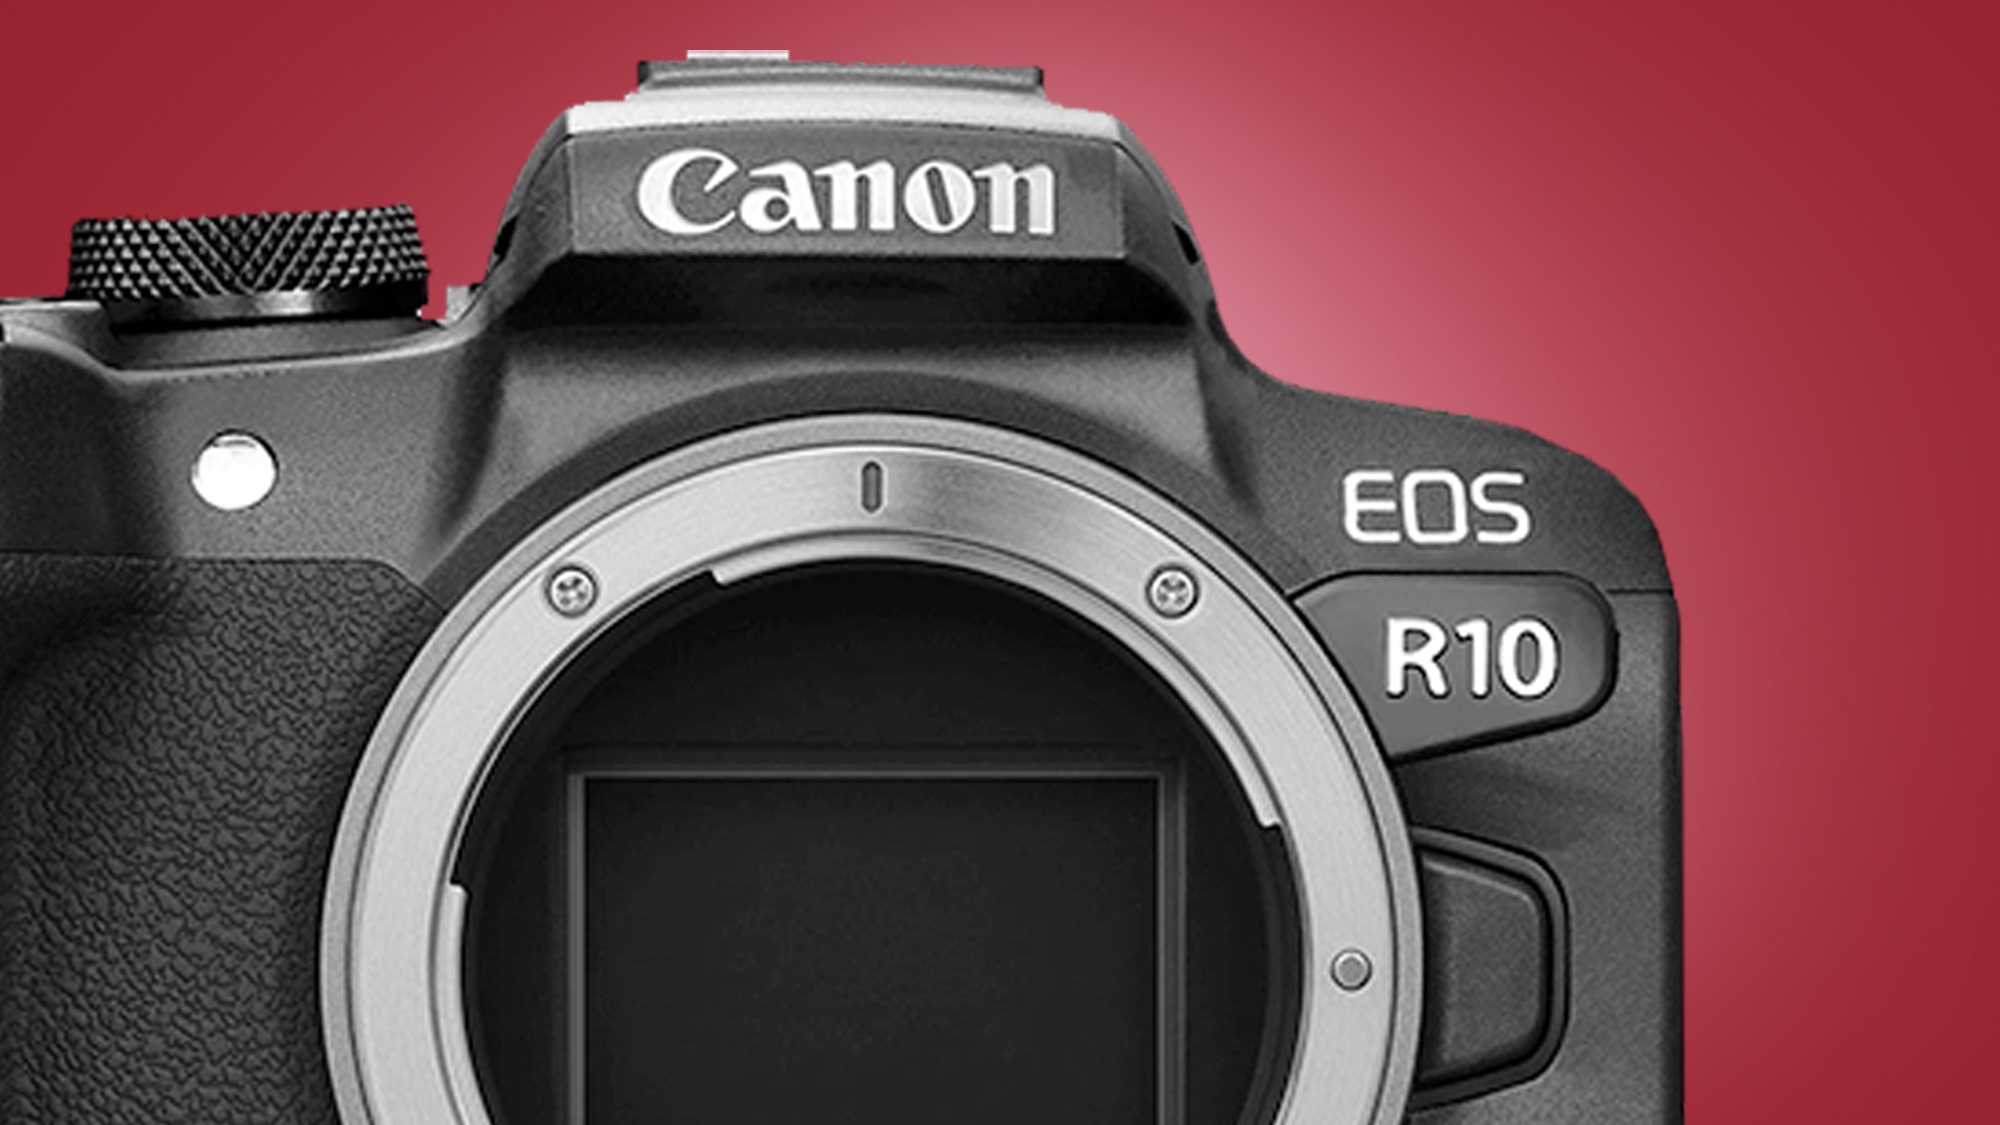 The Canon EOS R10 on a red background